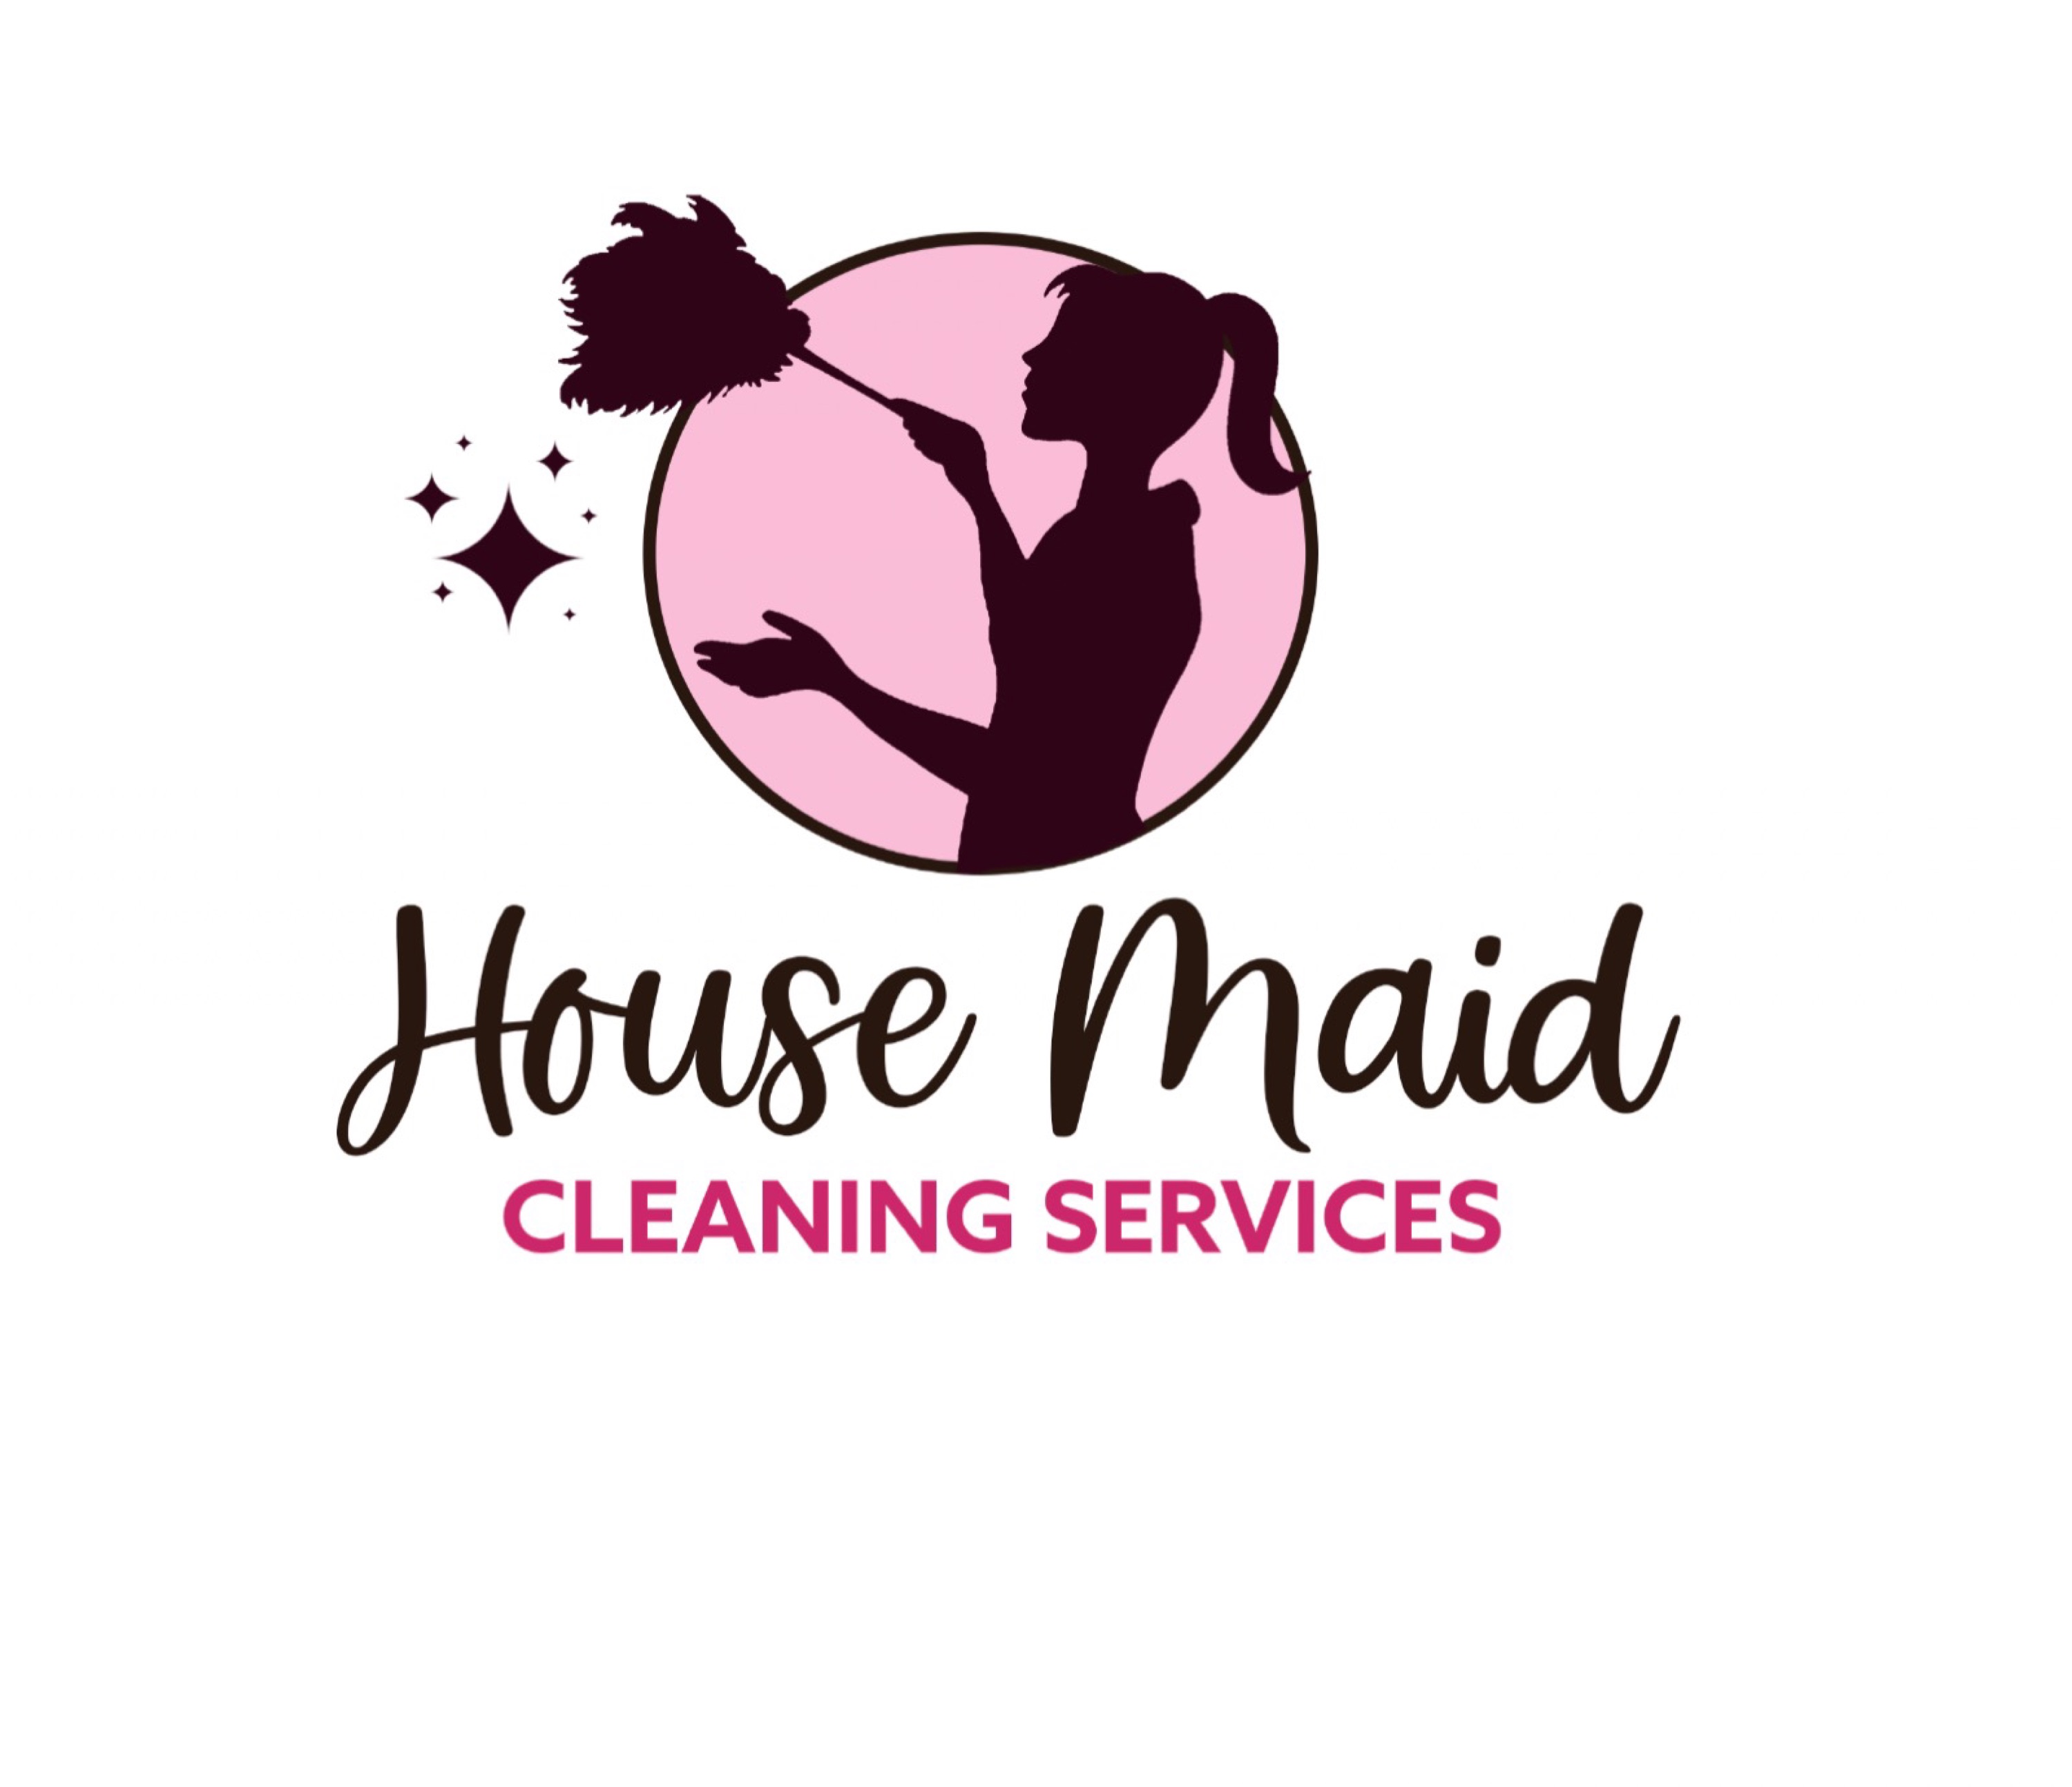 House Maid Cleaning Services Logo